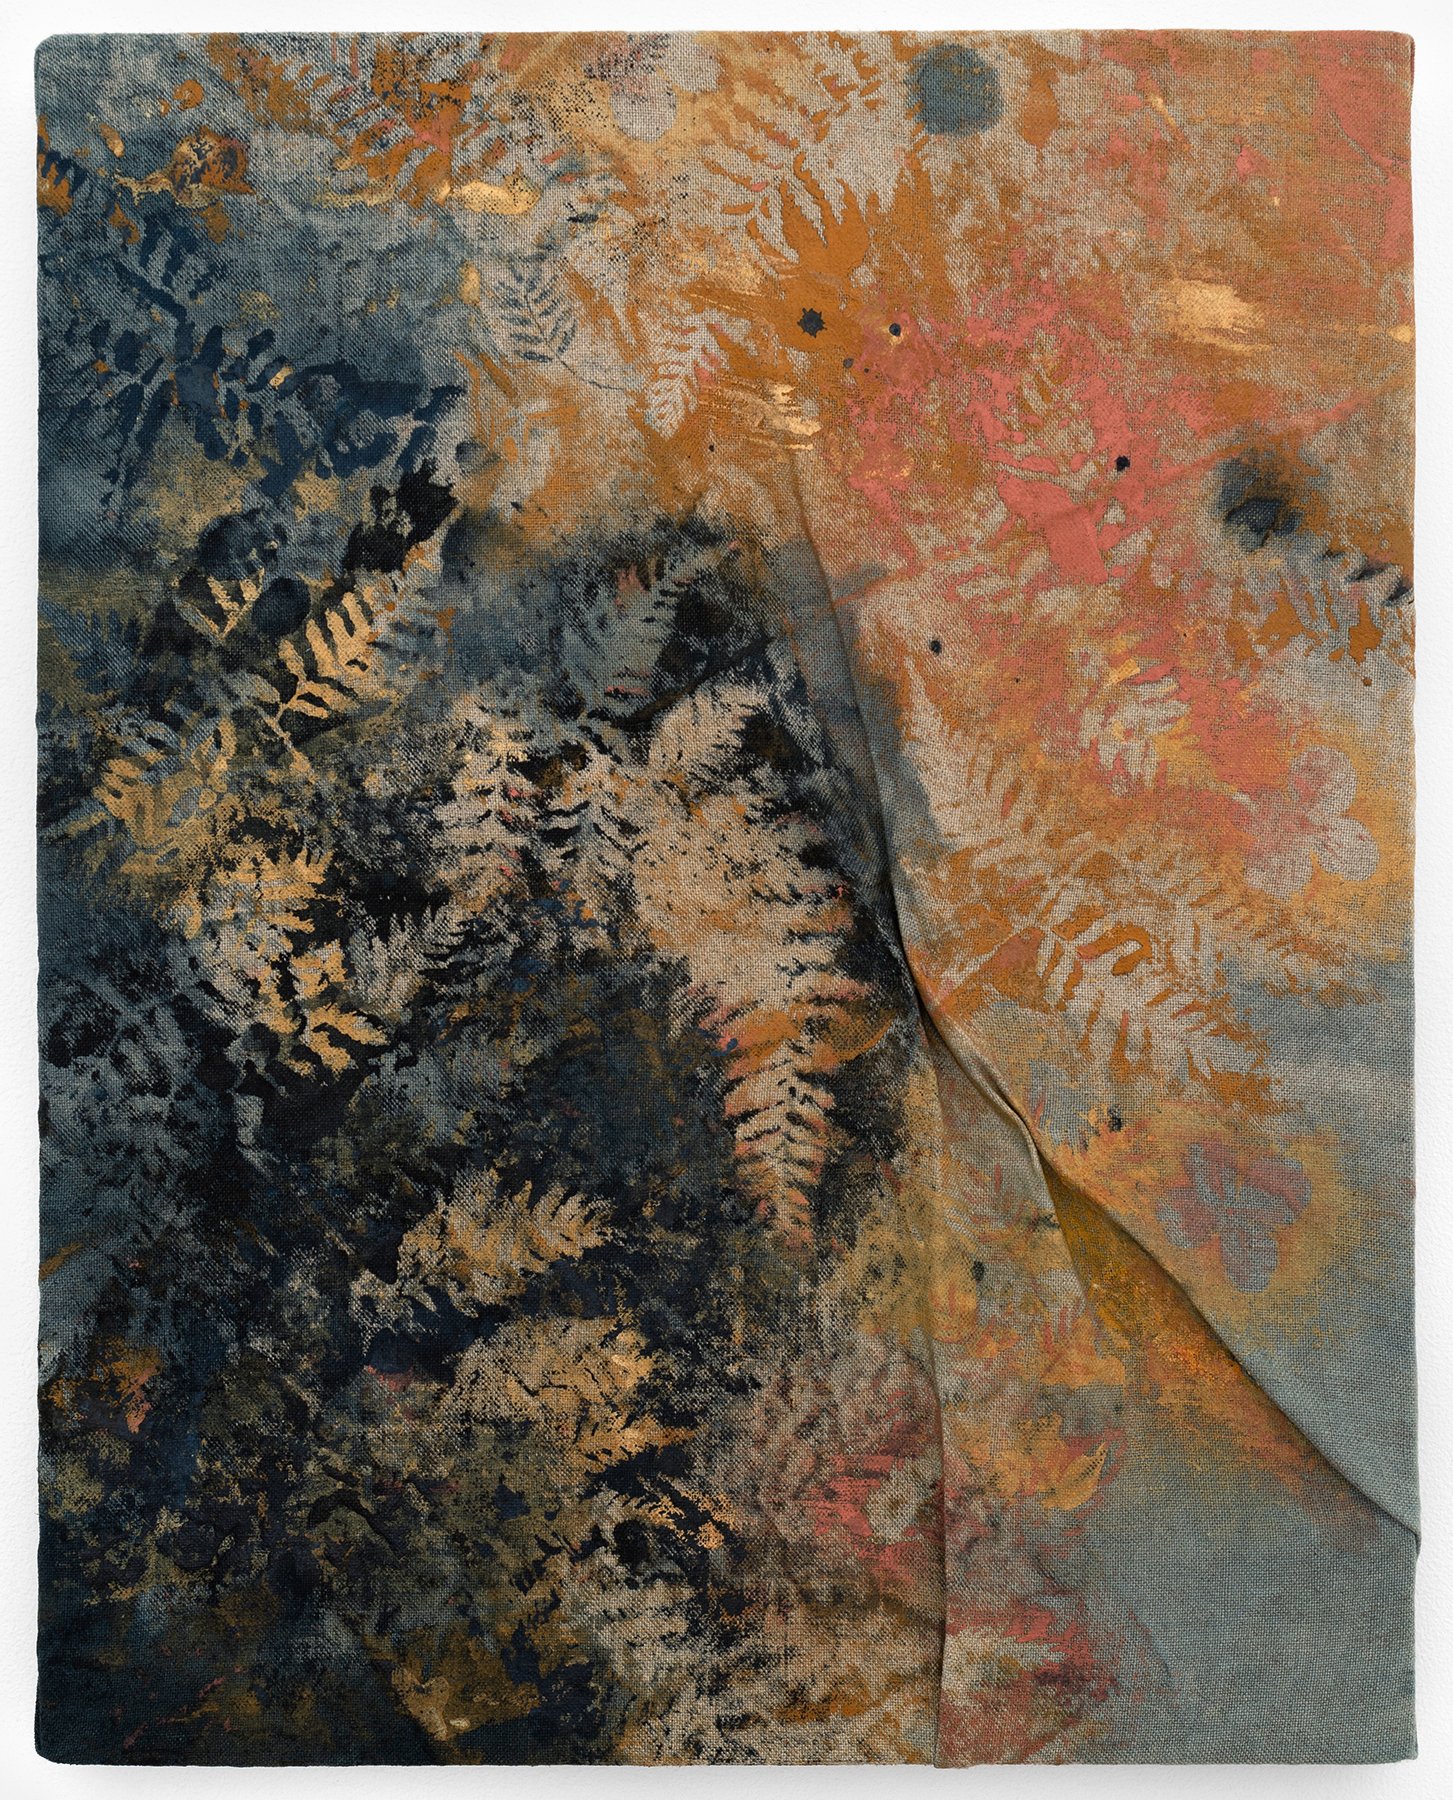   Painted Fern (Coral) , 2023                                                                                              Earth pigments and acrylic on linen, stitched                                                                                  